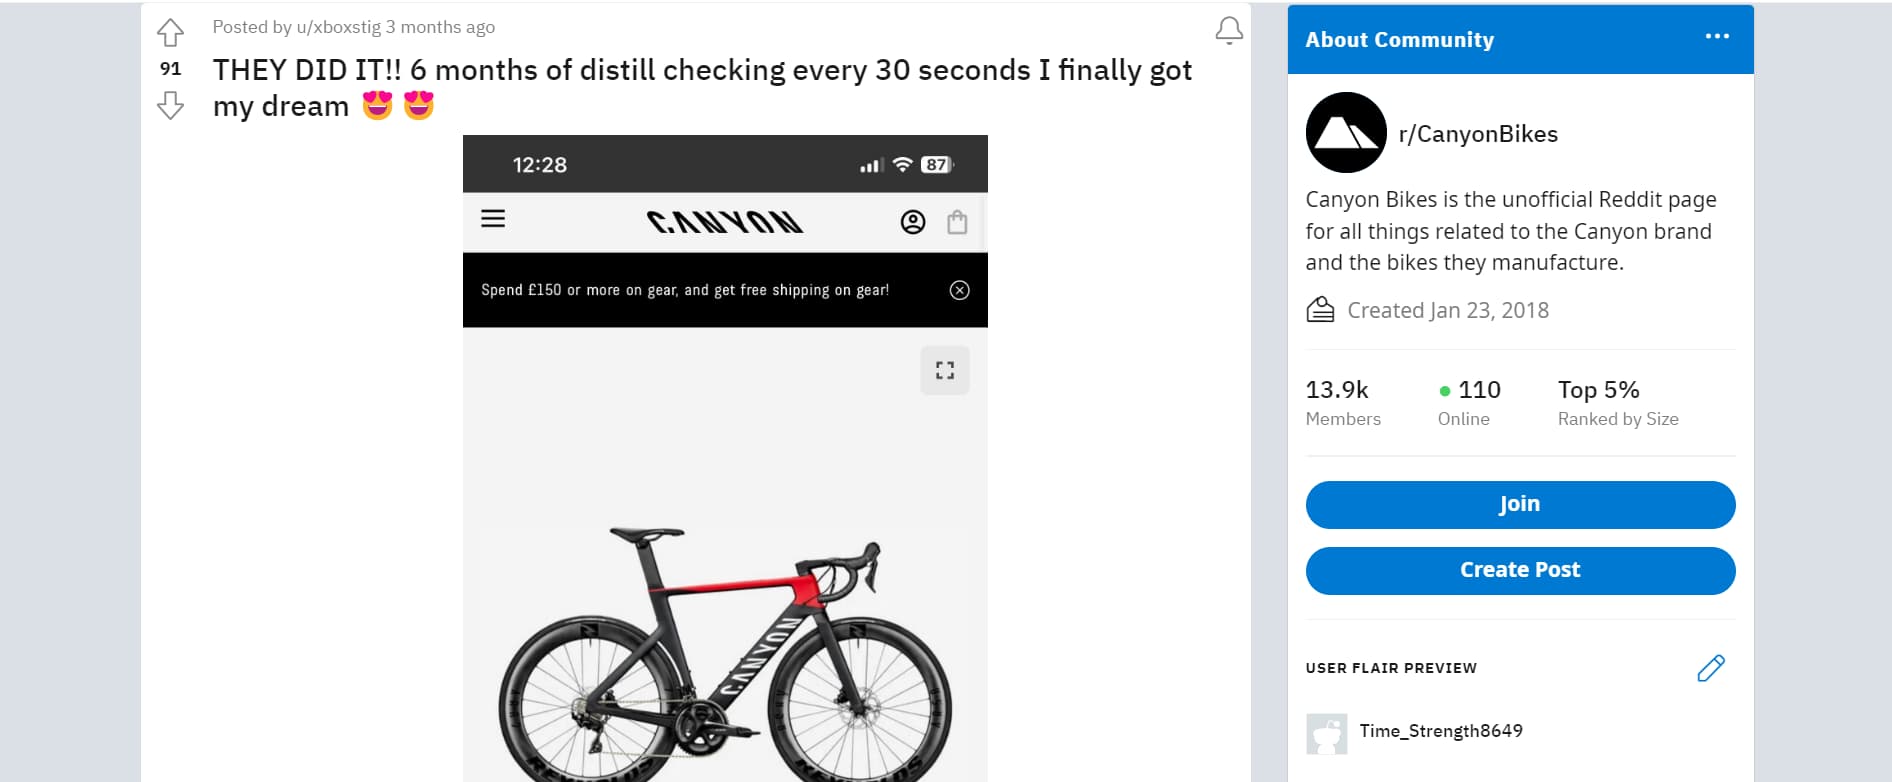 Reddit post for successful purchase of bike with Distill